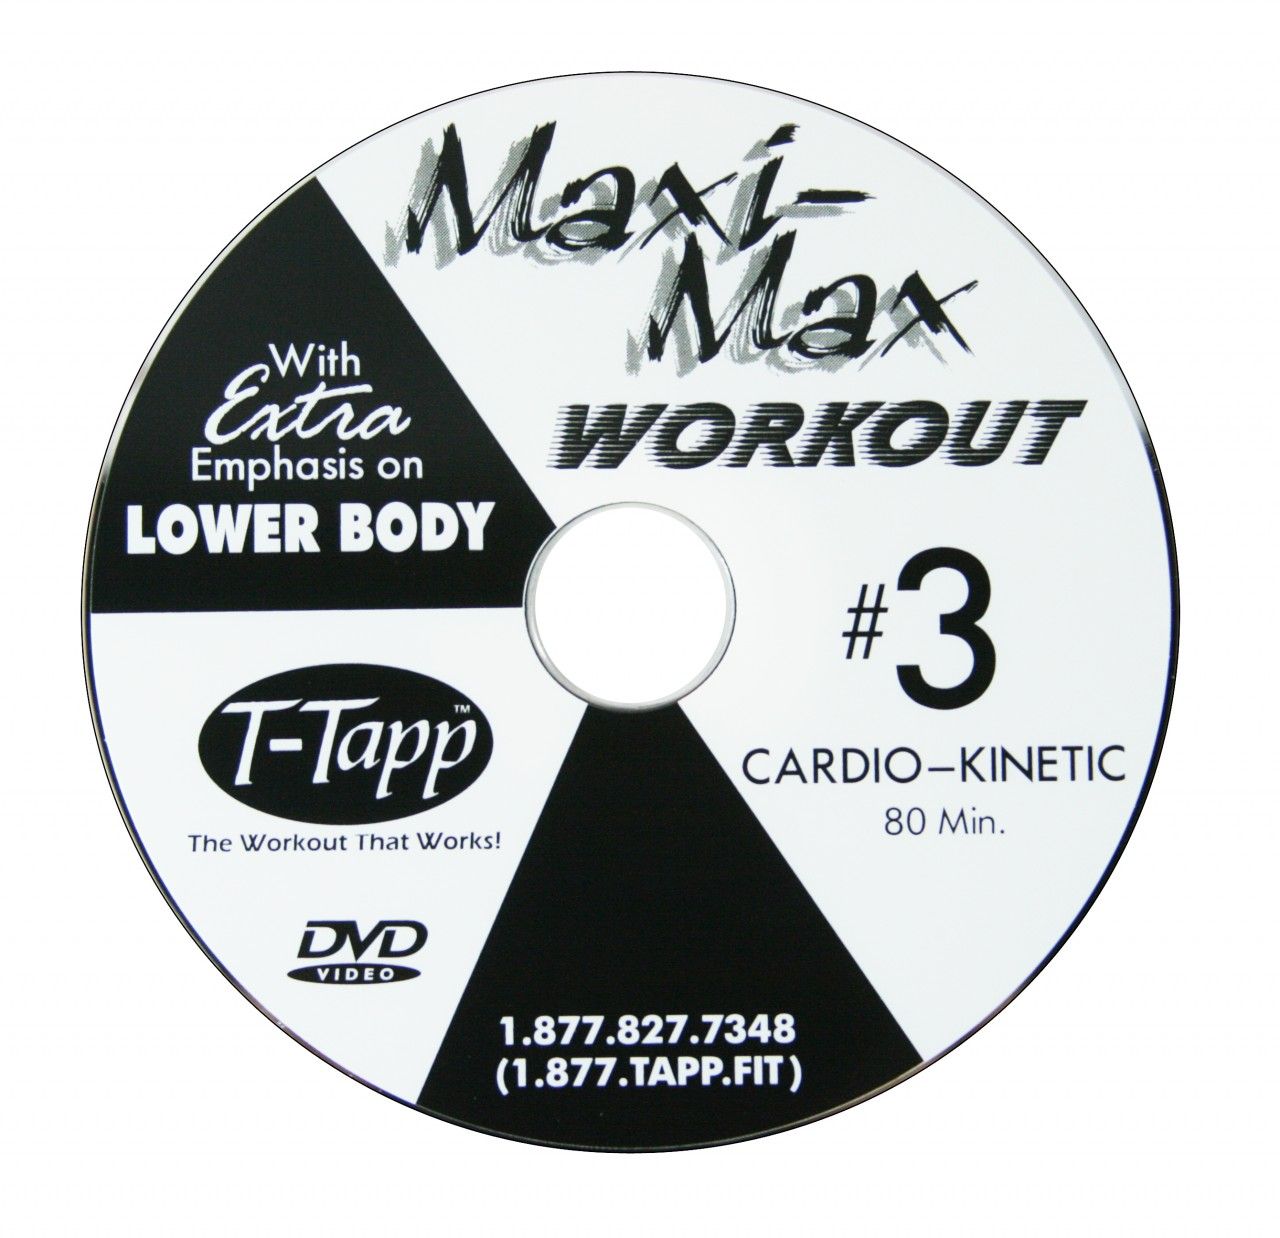 T-Tapp Maxi Max #3 is a Cardio-Kinetic Workout with Extra Emphasis on Lower  Body. This is one of the most advanced and longest T-Tapp workouts.